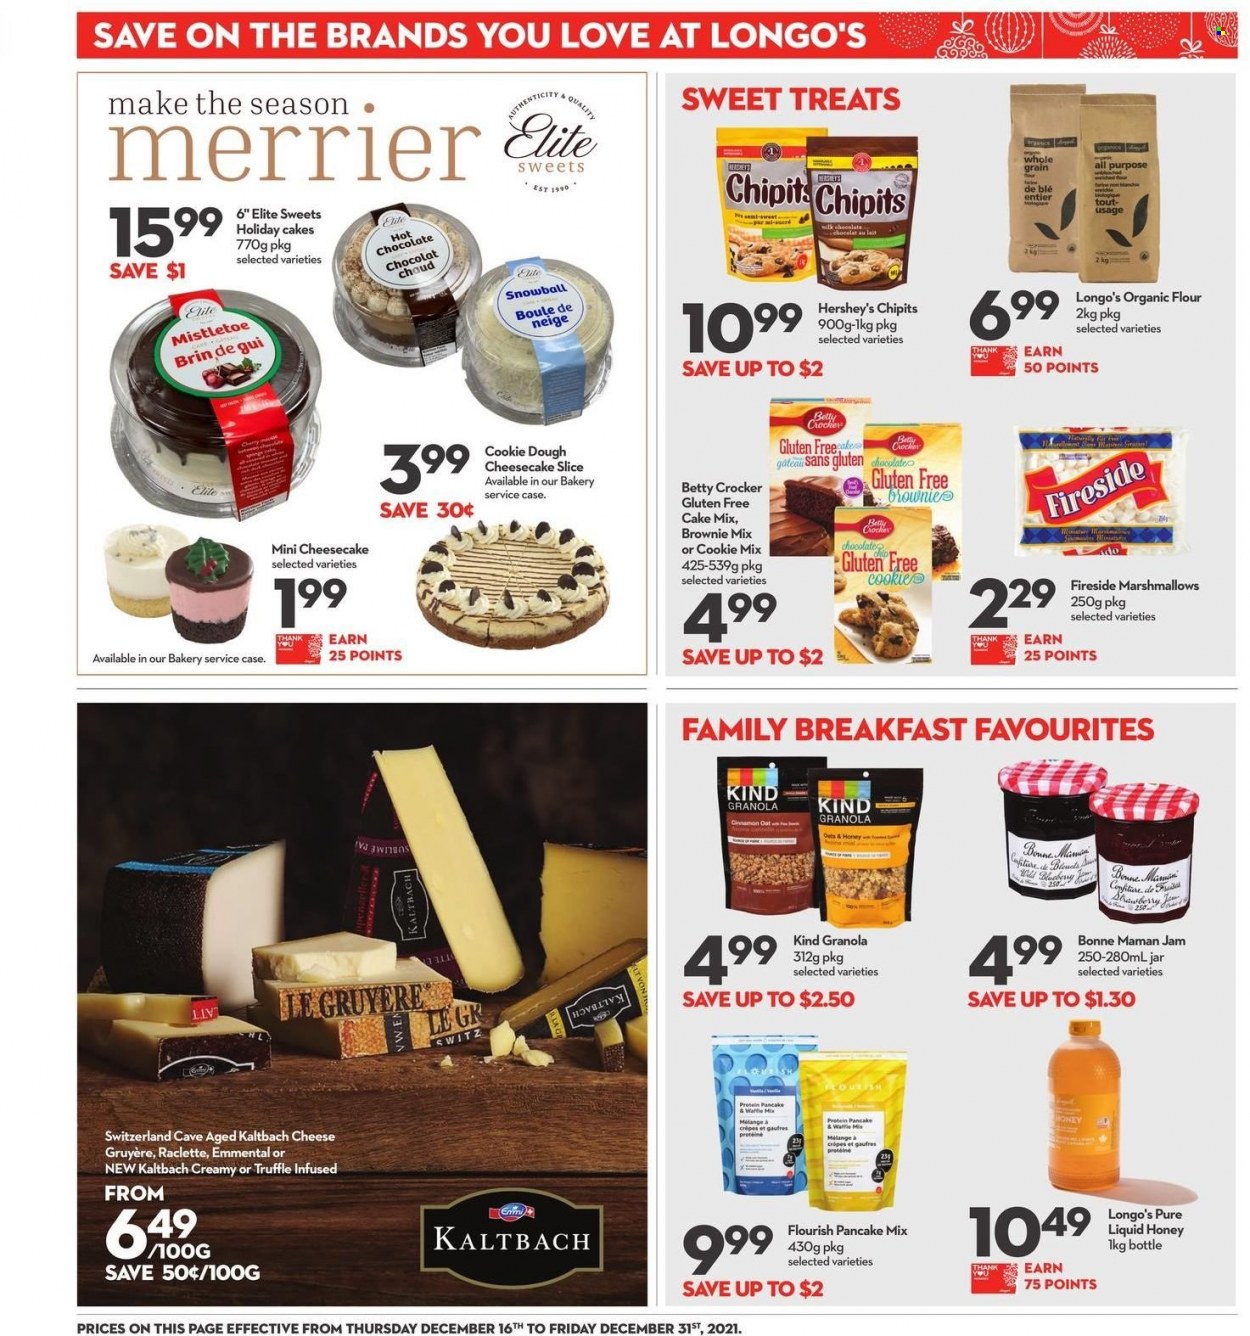 thumbnail - Longo's Flyer - December 16, 2021 - December 31, 2021 - Sales products - cheesecake, brownie mix, cake mix, pancakes, Gruyere, raclette cheese, cheese, Hershey's, cookie dough, marshmallows, truffles, flour, oats, cinnamon, honey, fruit jam, hot chocolate, granola. Page 21.